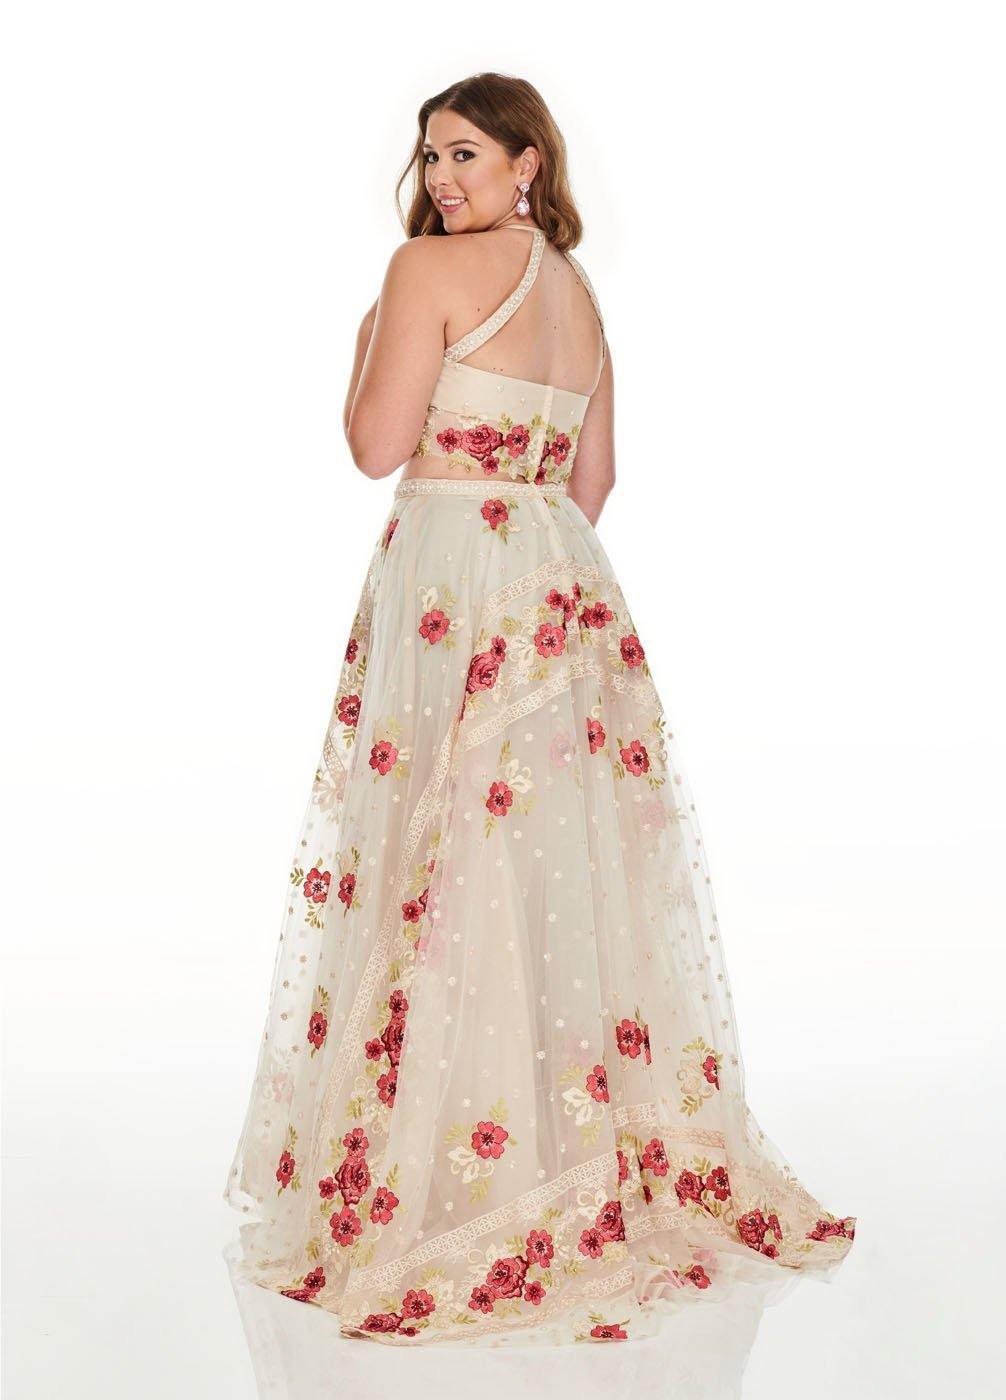 Two Piece Sexy Long Plus Size Prom Dress for $639.99 – The Dress Outlet